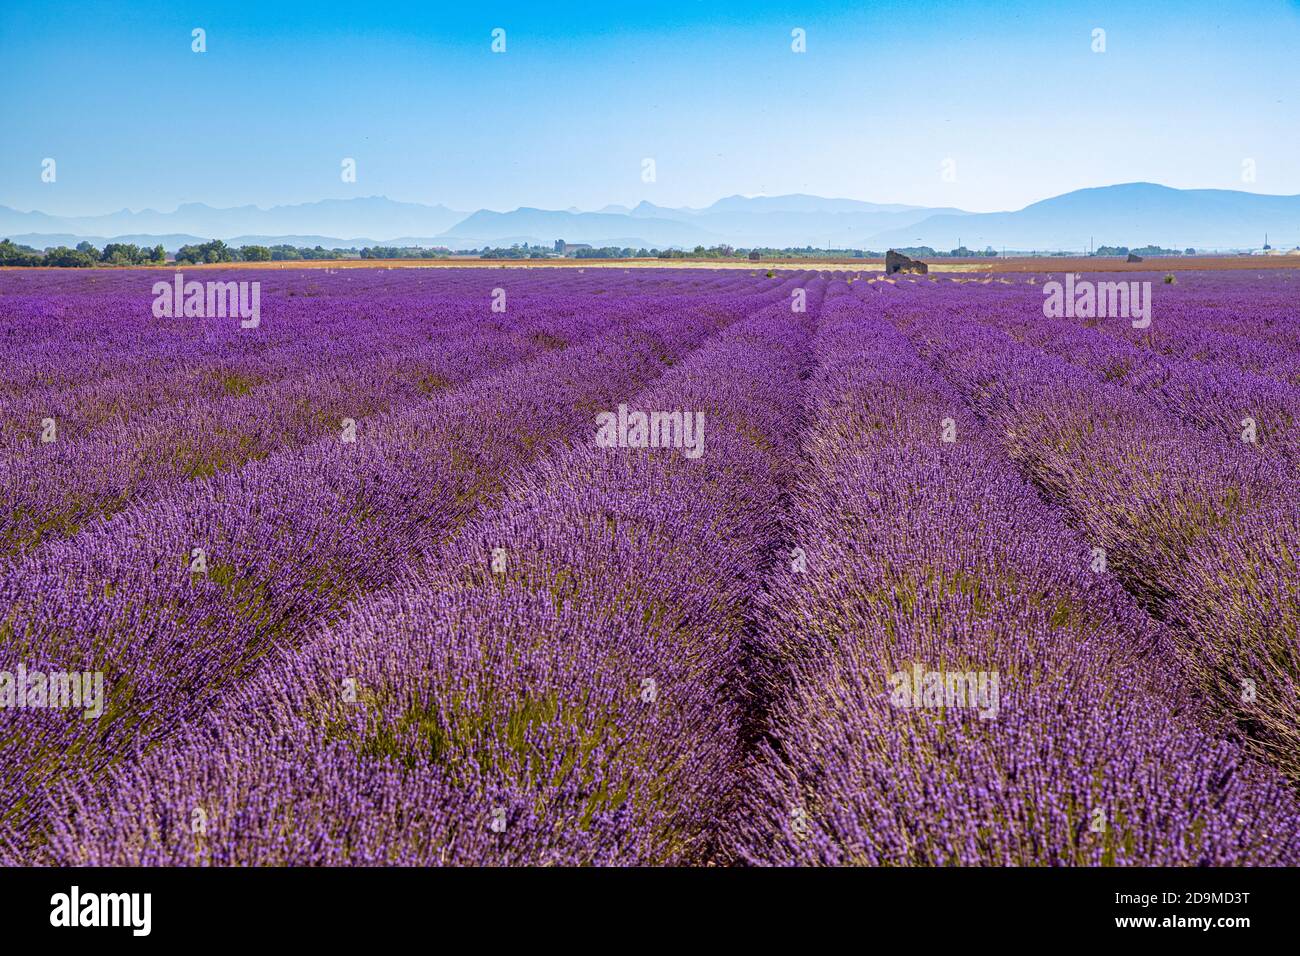 Wonderful nature landscape, amazing scenery with blooming lavender flowers. Moody sky, pastel colors on bright landscape view. Floral panoramic Stock Photo